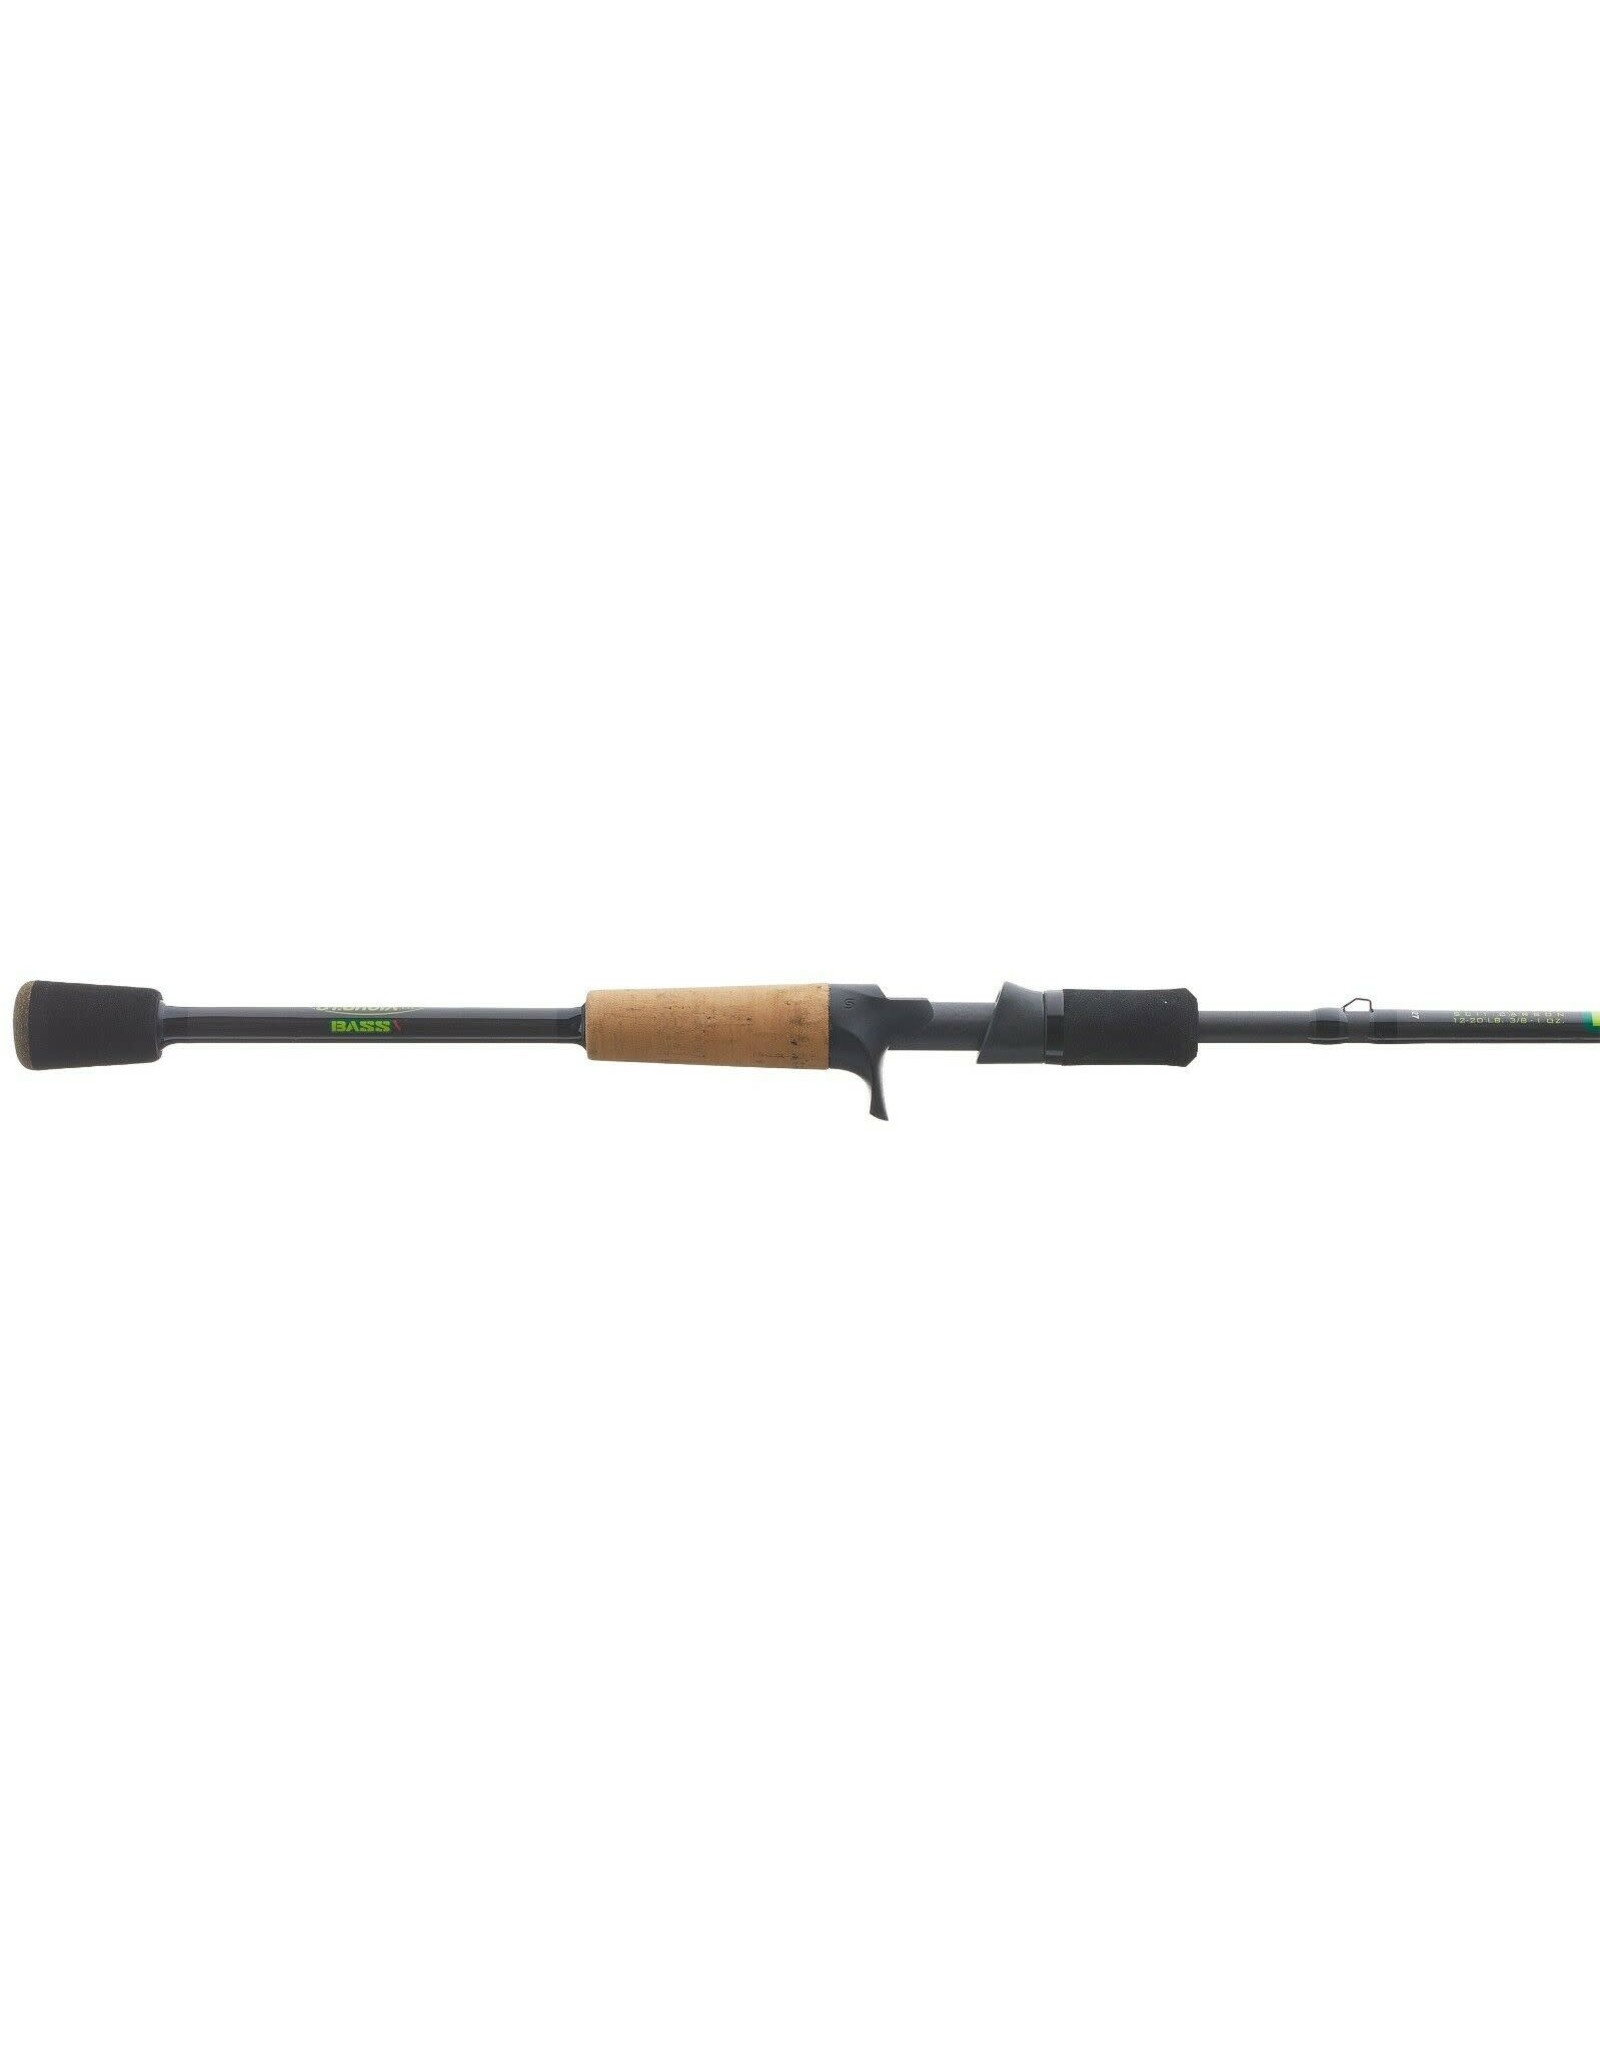 Details about St. Croix Bass X 7'1 Medium Heavy Fast Casting Rod BAC71MHF  - Bronson